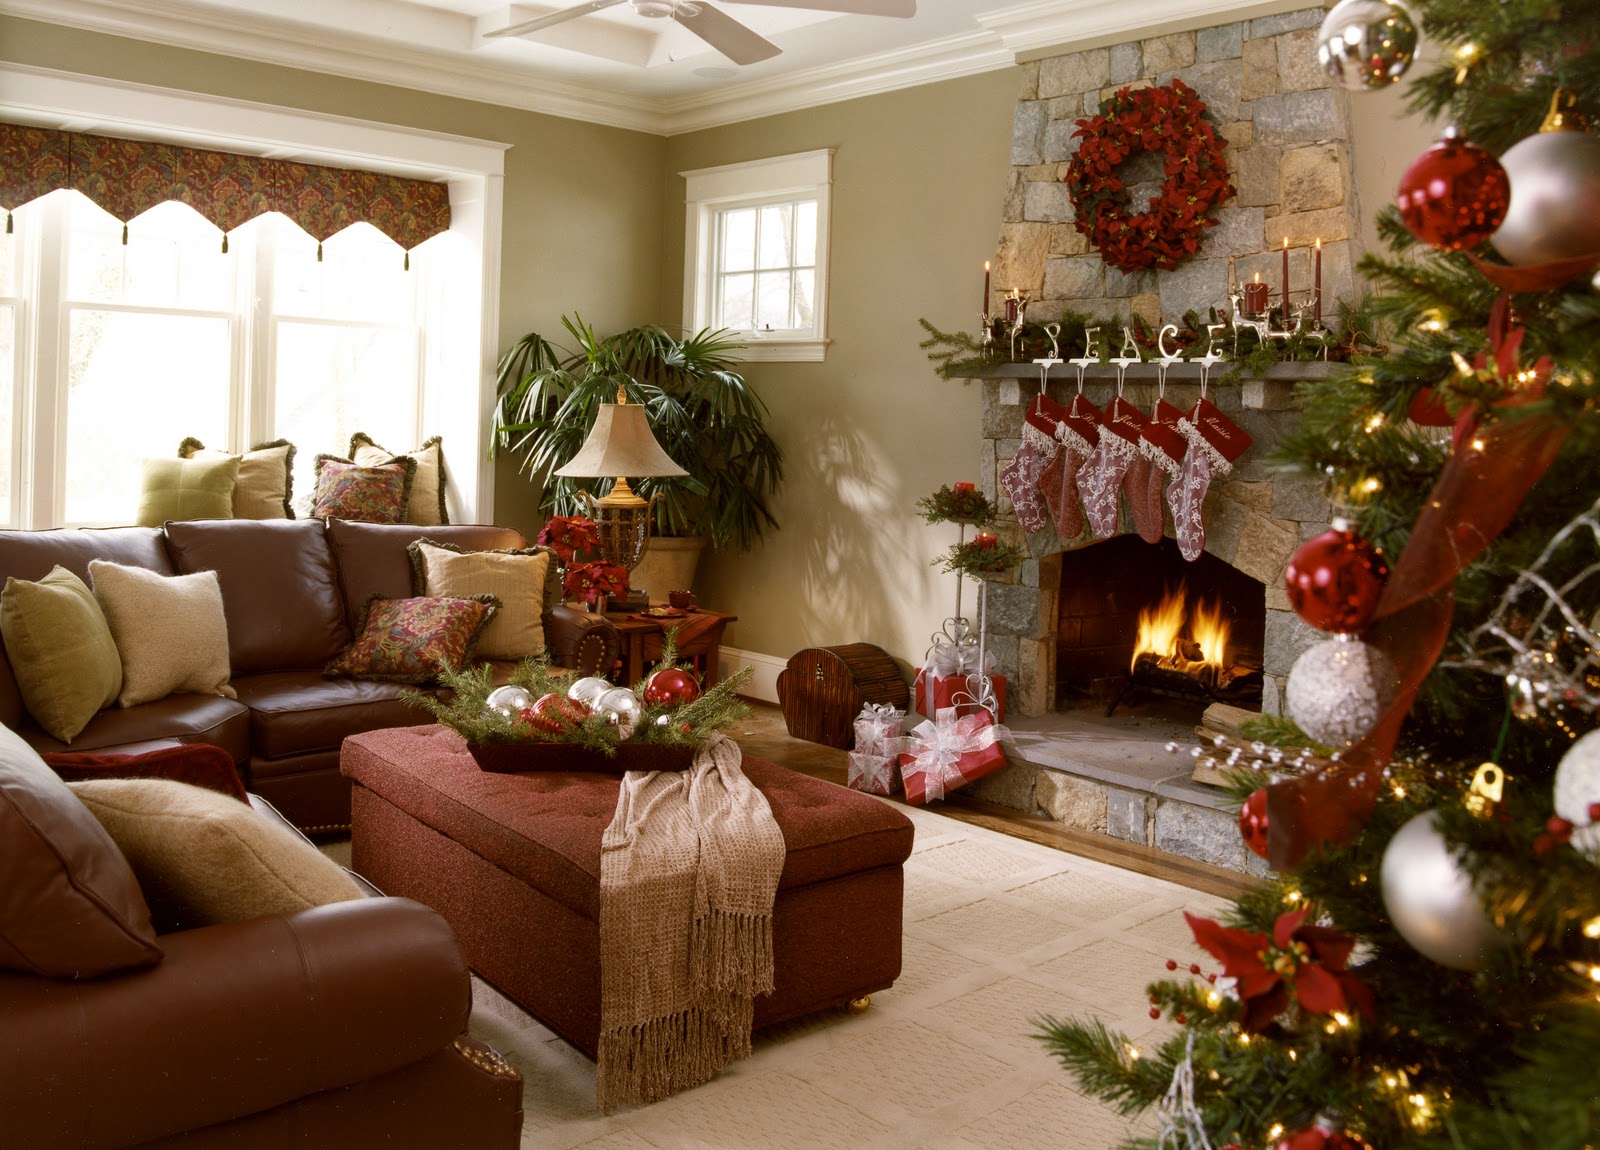 7 Classic Christmas Decorating Ideas For Your Living Room